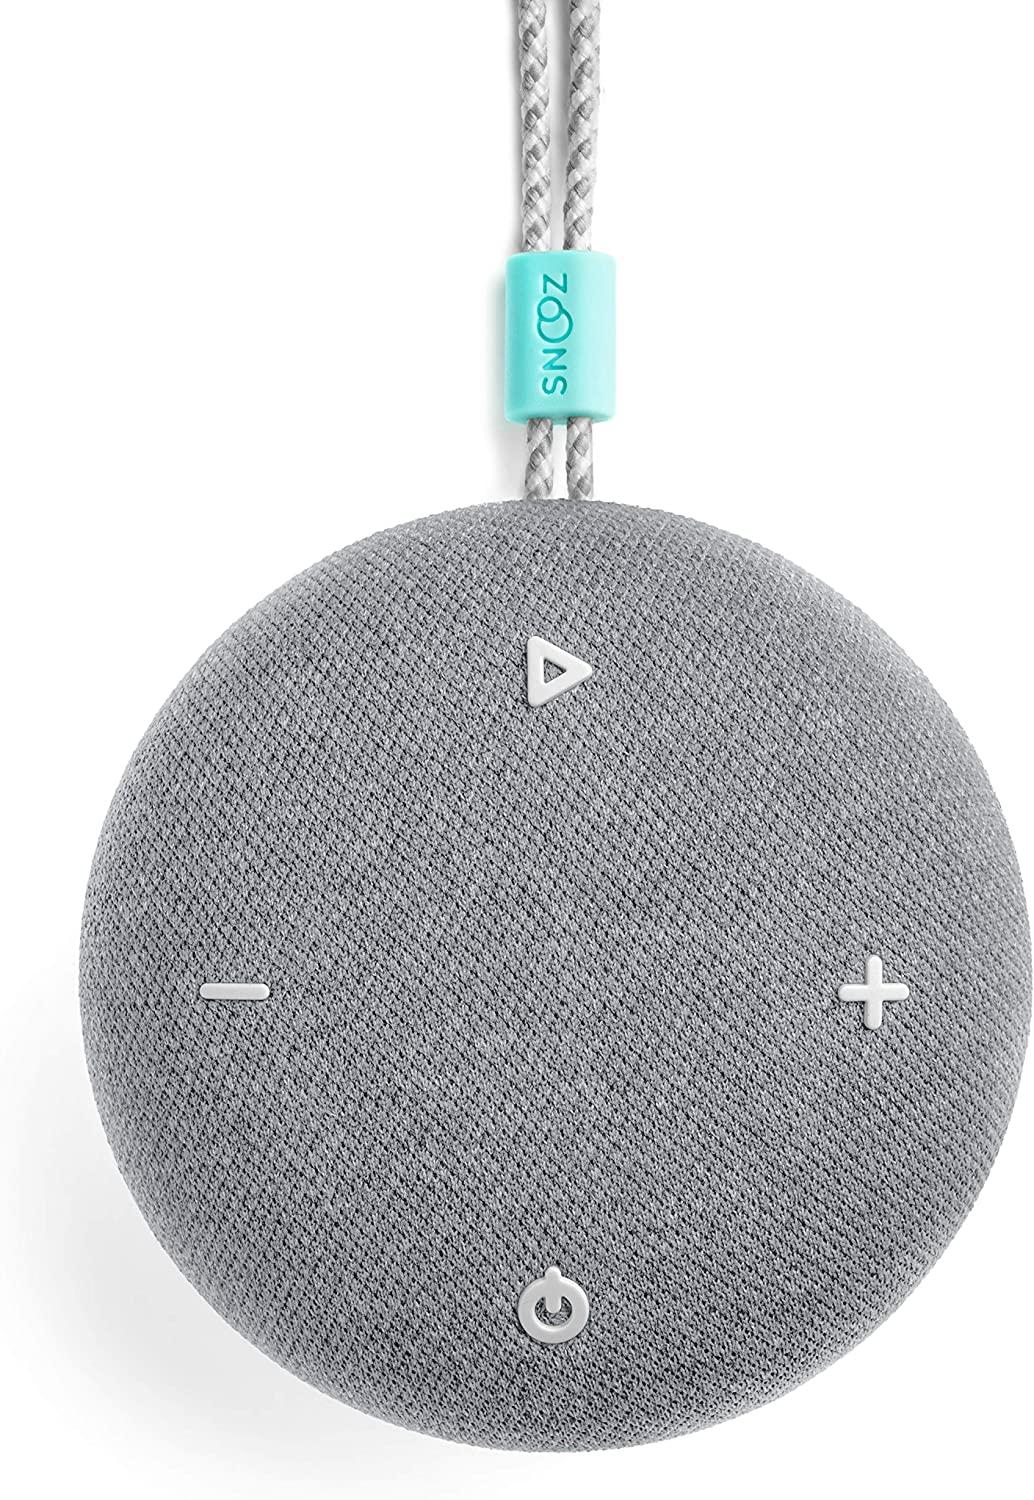 SNOOZ Button - White Noise Sound Machine - Non-Looping White Noise, Pink  Noise, and Fan Sounds Plus Bluetooth Speaker - Charcoal